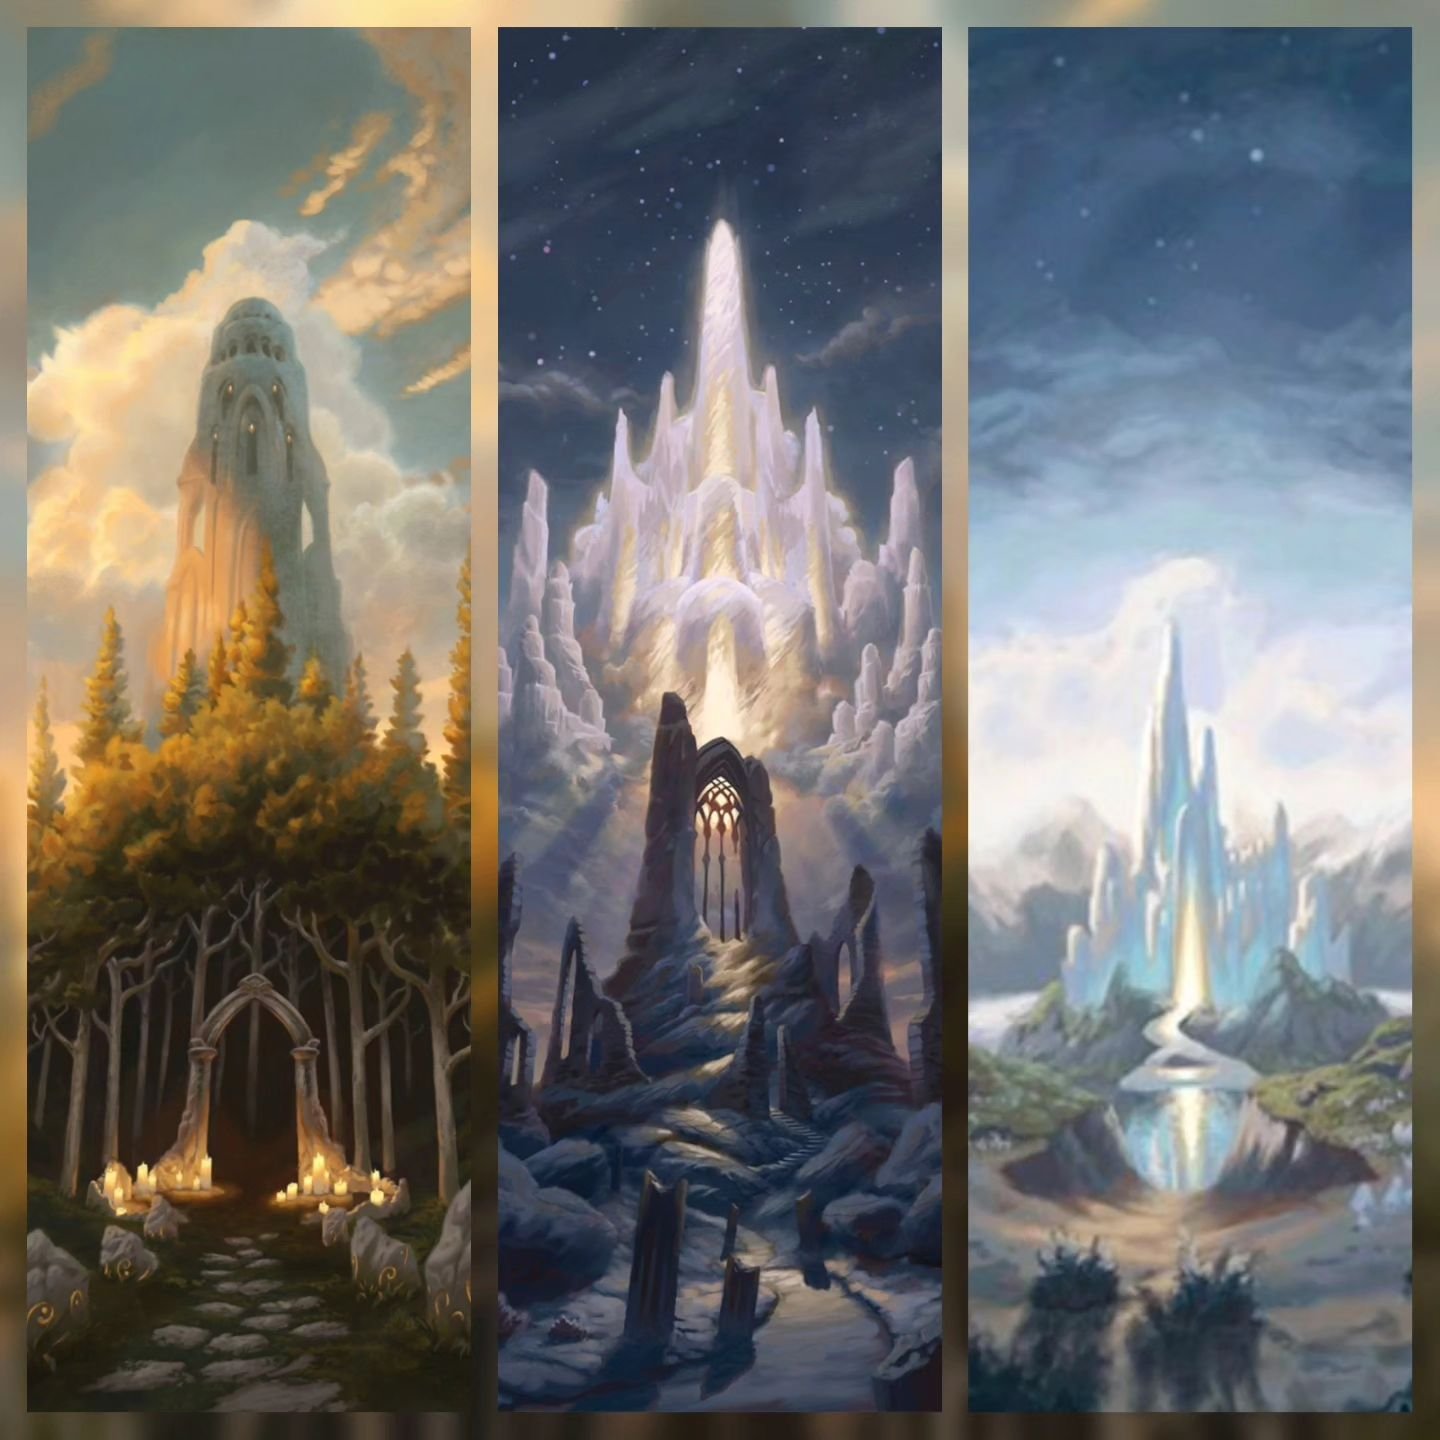 The Fey Door, Memory &amp; Dream, and Unto Dawn--check out these new pieces in my web st0re.

#theelselands #mtg #magicthegathering #dungeonsanddragons #dnd #tarot #tarotcard #tarotcards #tarotdeck #tarotdecks #thetower #dungeonsynth #fantasyart